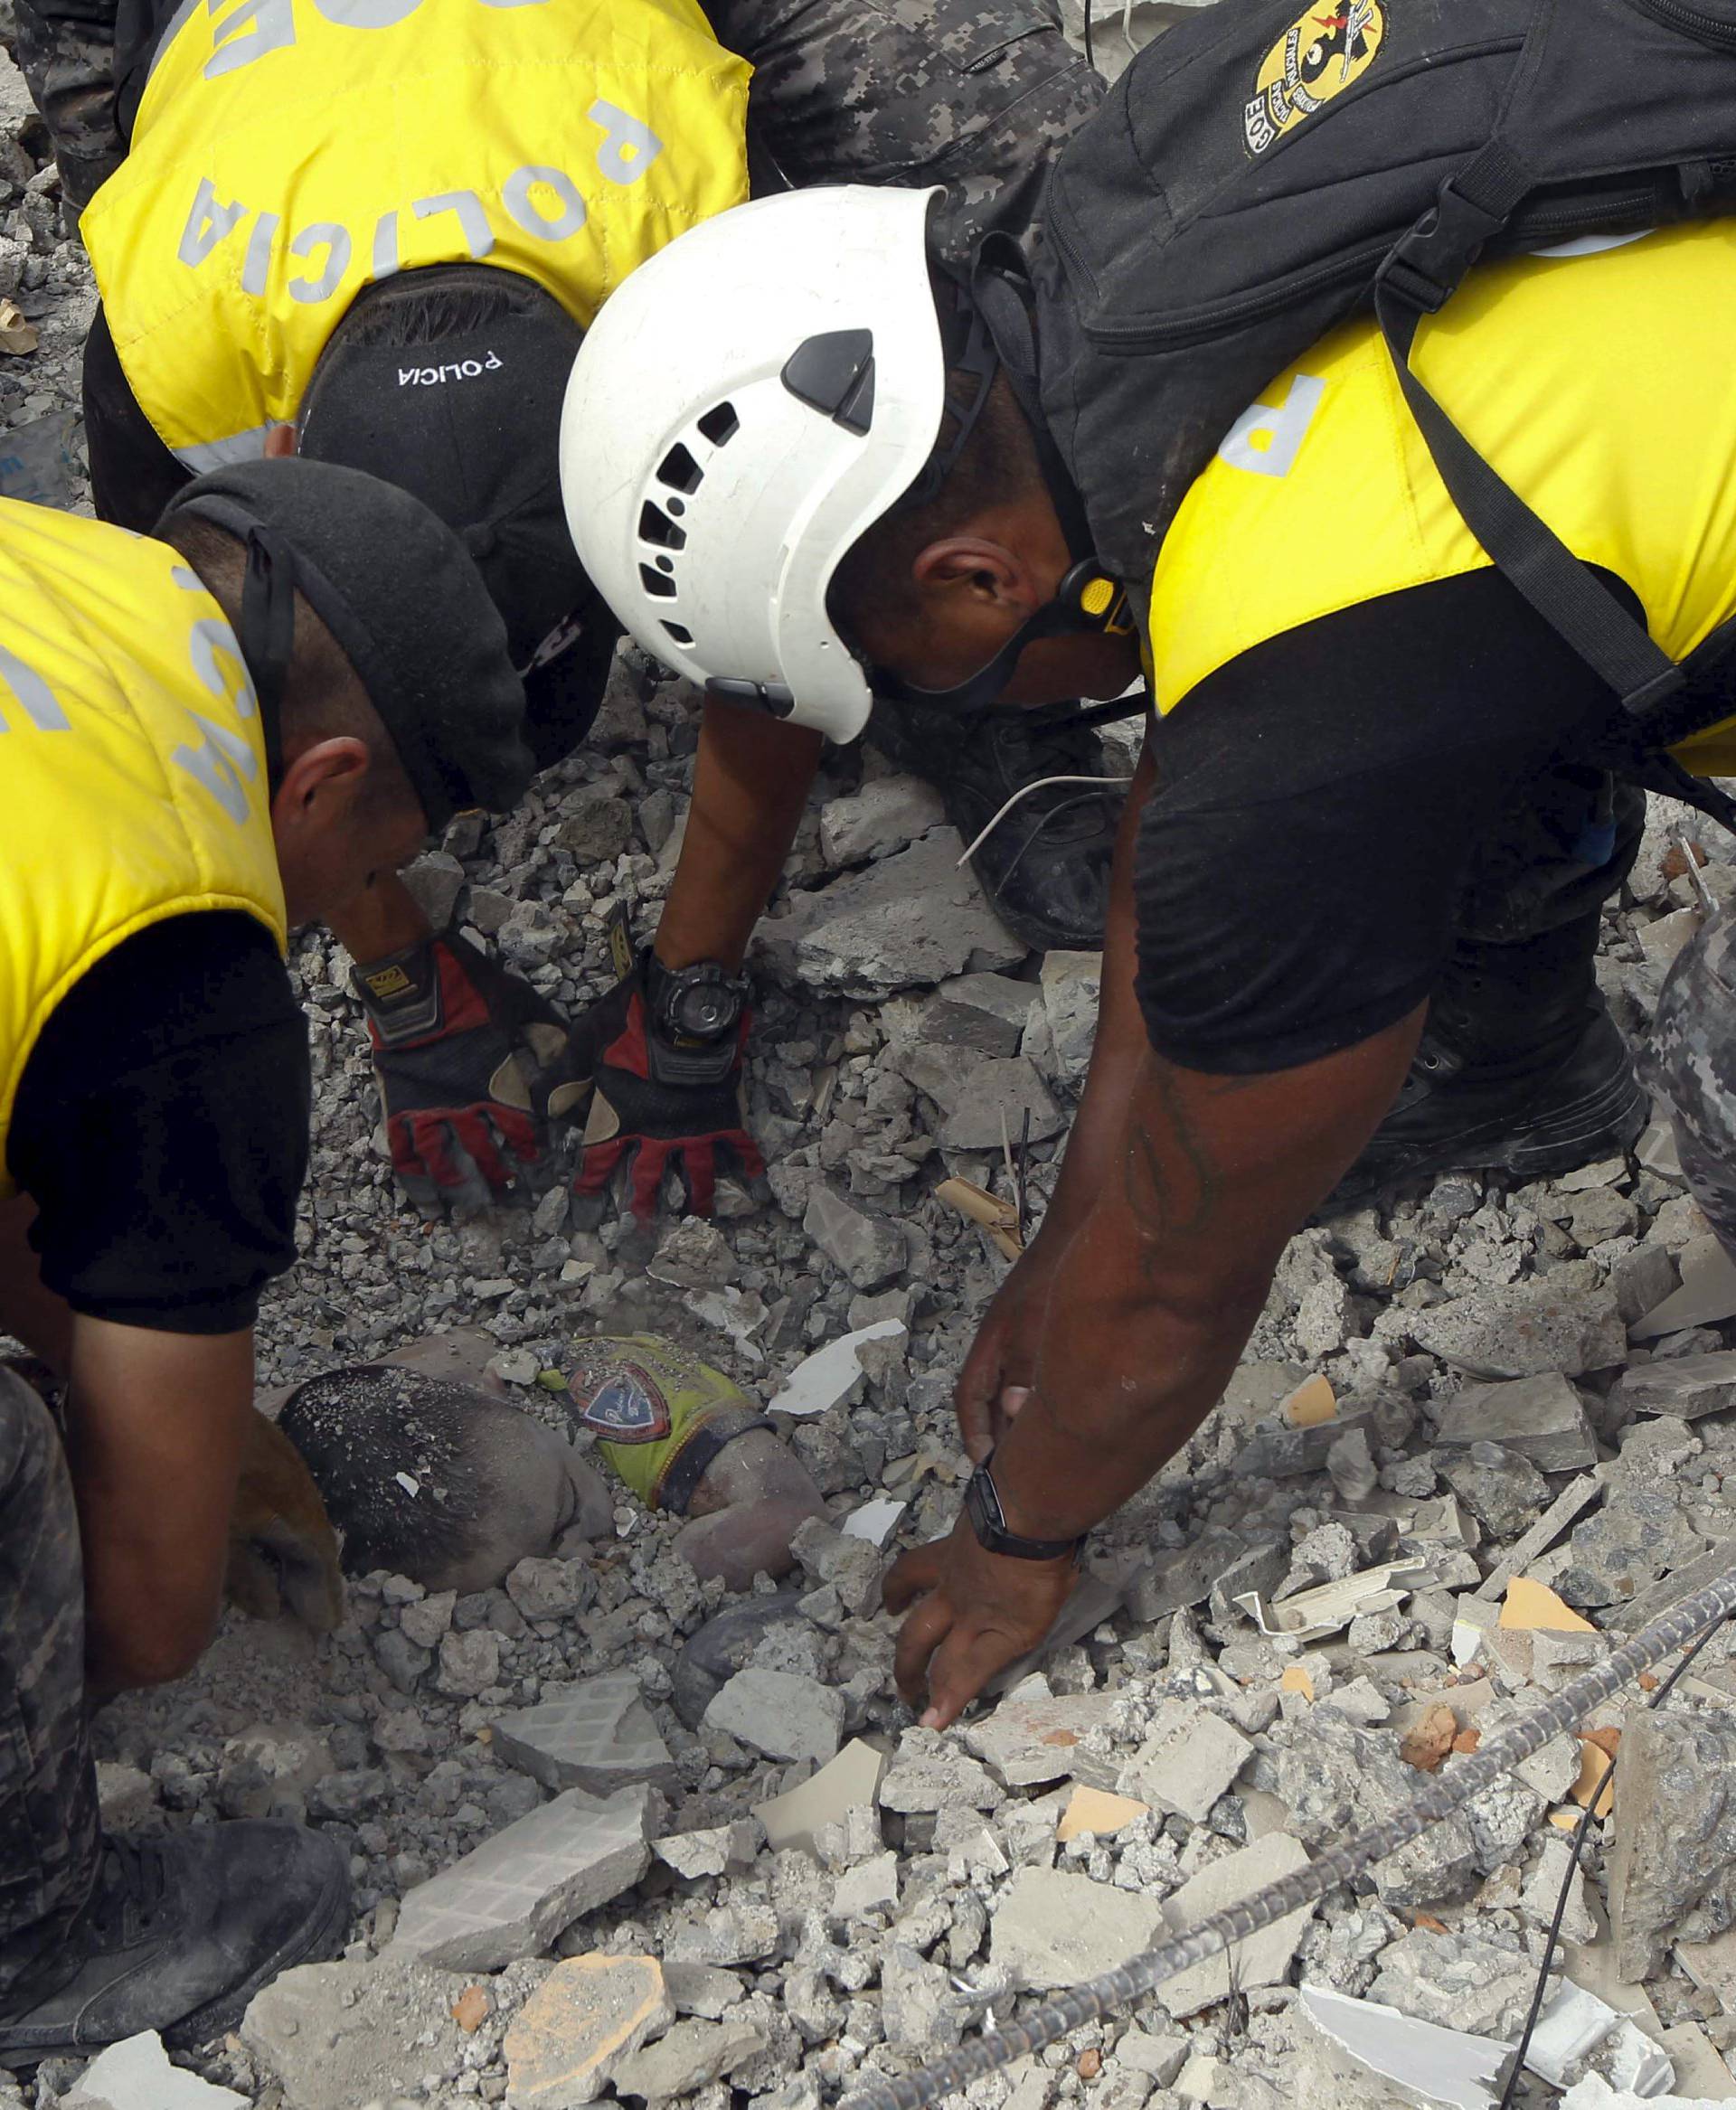 Police officers uncover the body of a victim after an earthquake struck off Ecuador's Pacific coast, at Tarqui neighborhood in Manta